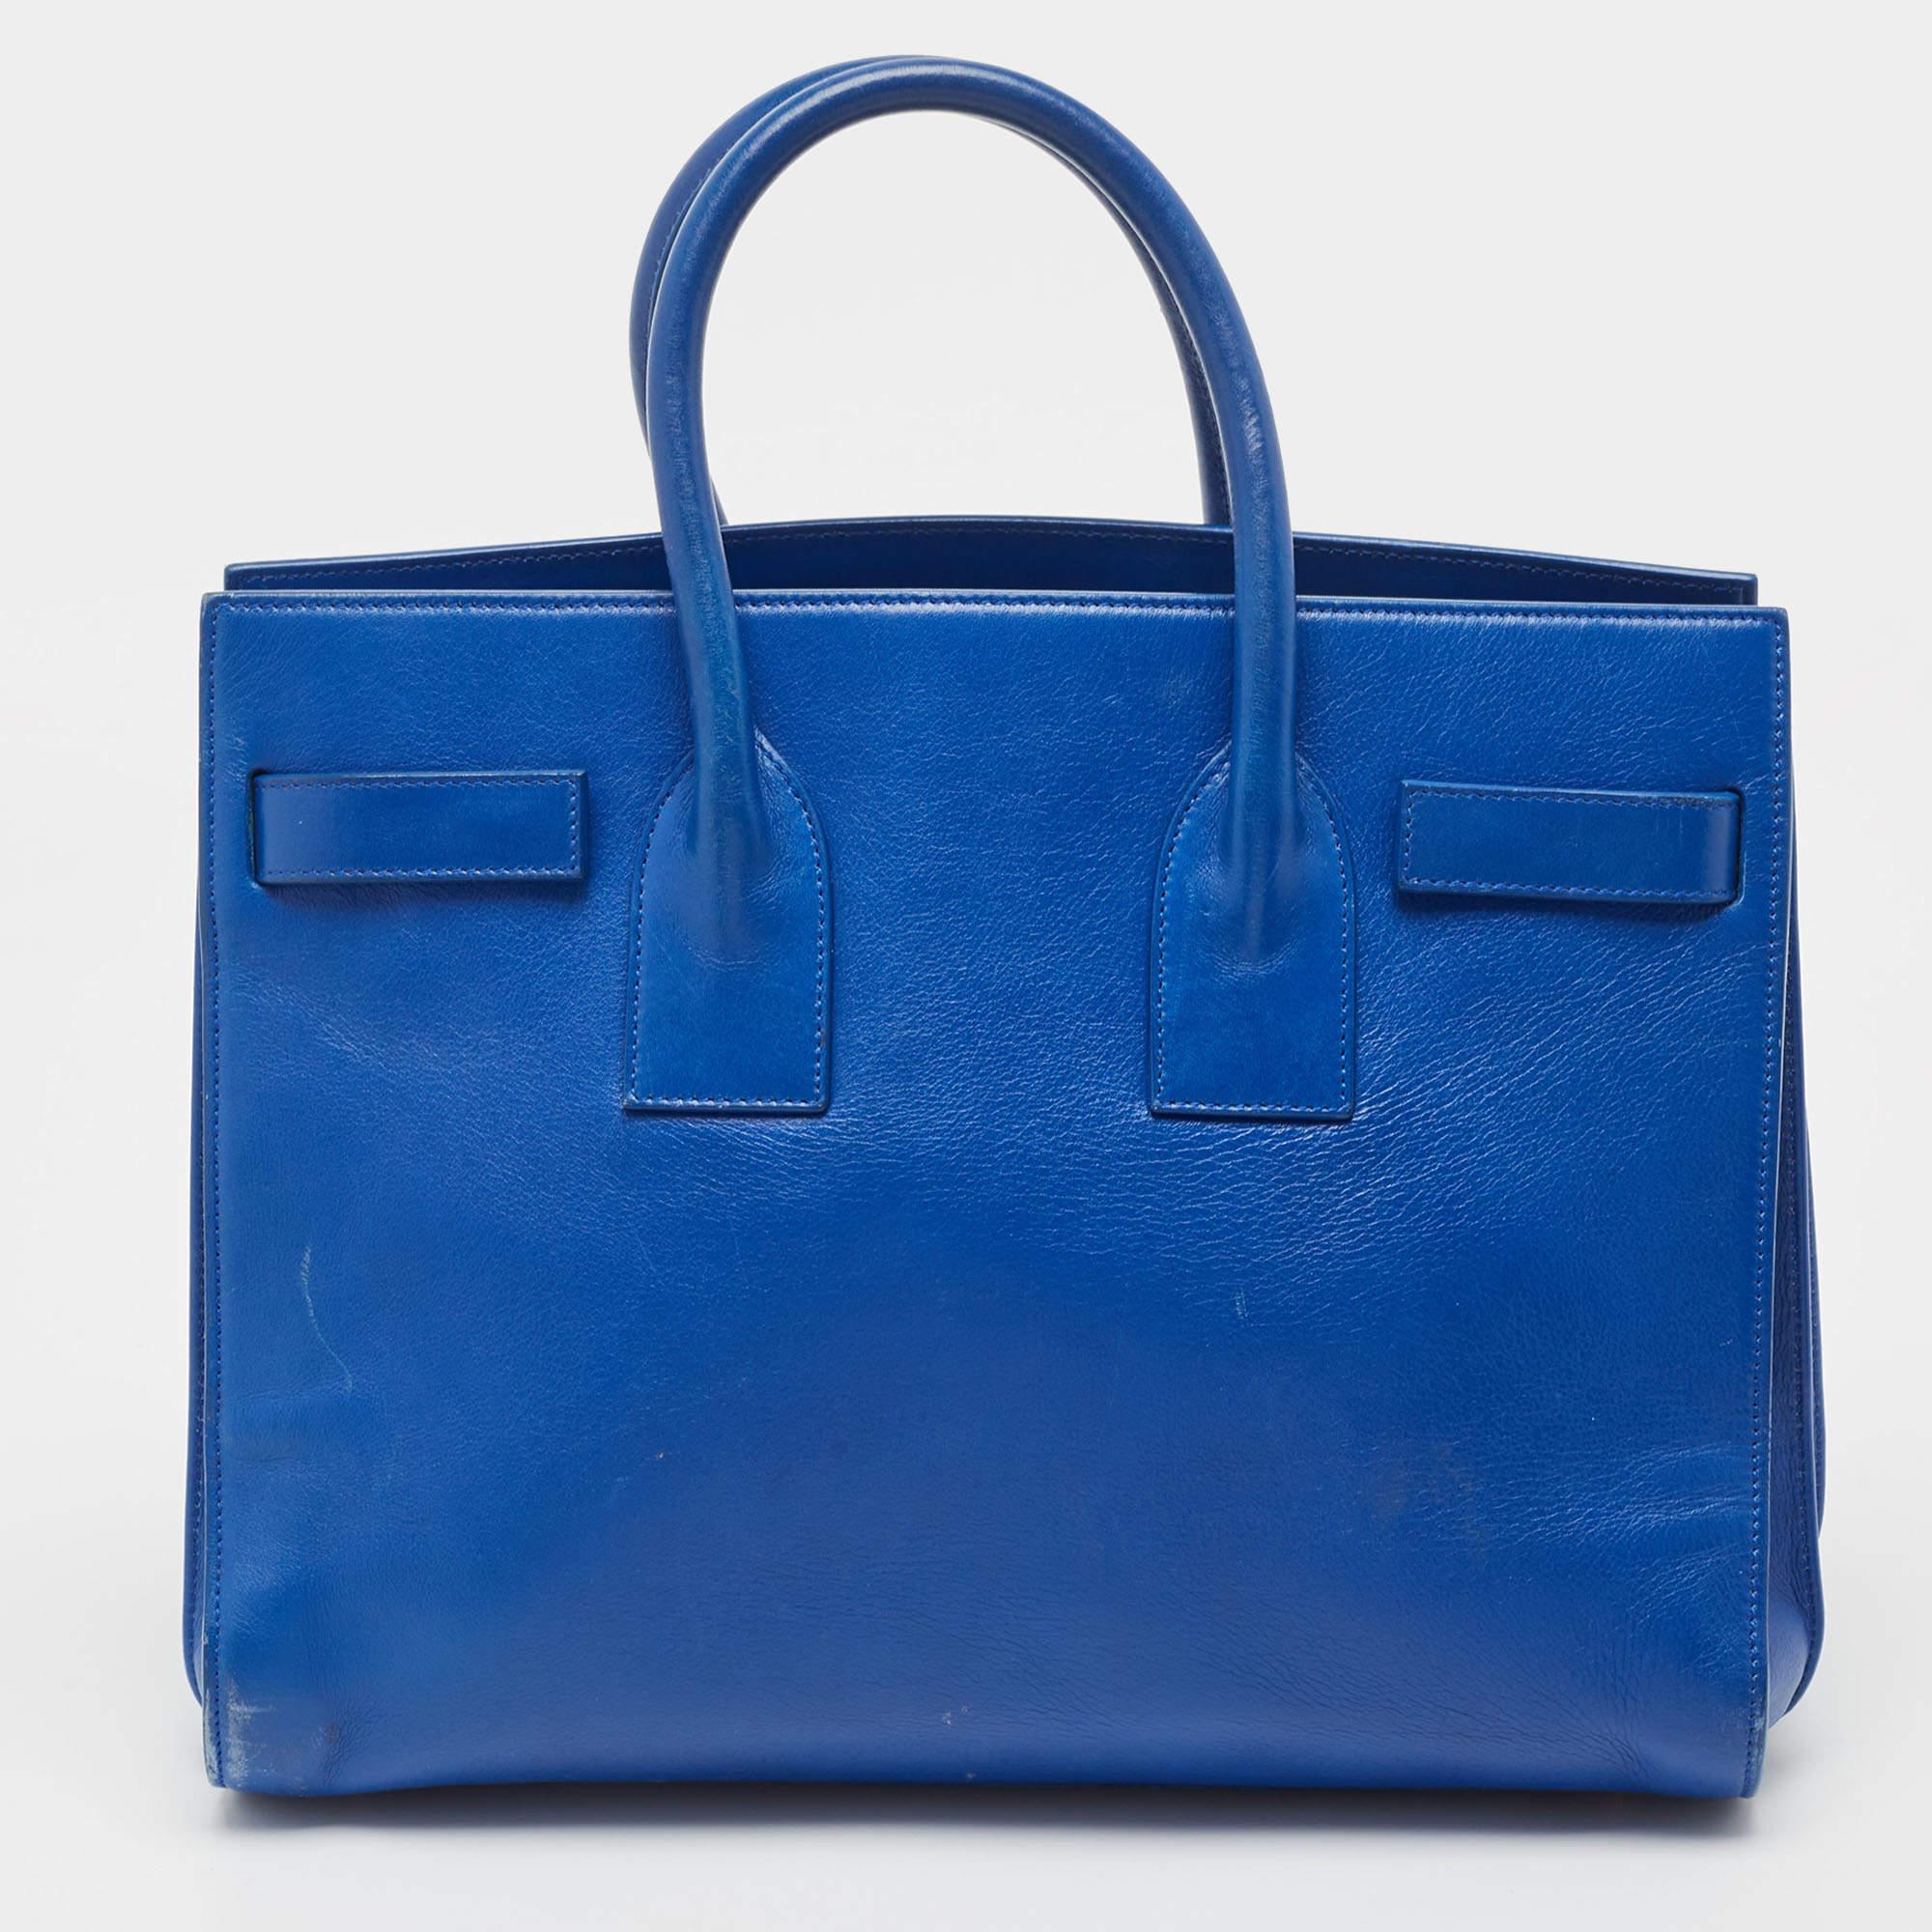 This Sac de Jour tote by Saint Laurent has a structure that exhibits a sophisticated image. Crafted from blue leather, the bag can be carried in a chic way by double top handles and a shoulder strap. The tote comes with a stylish interior with